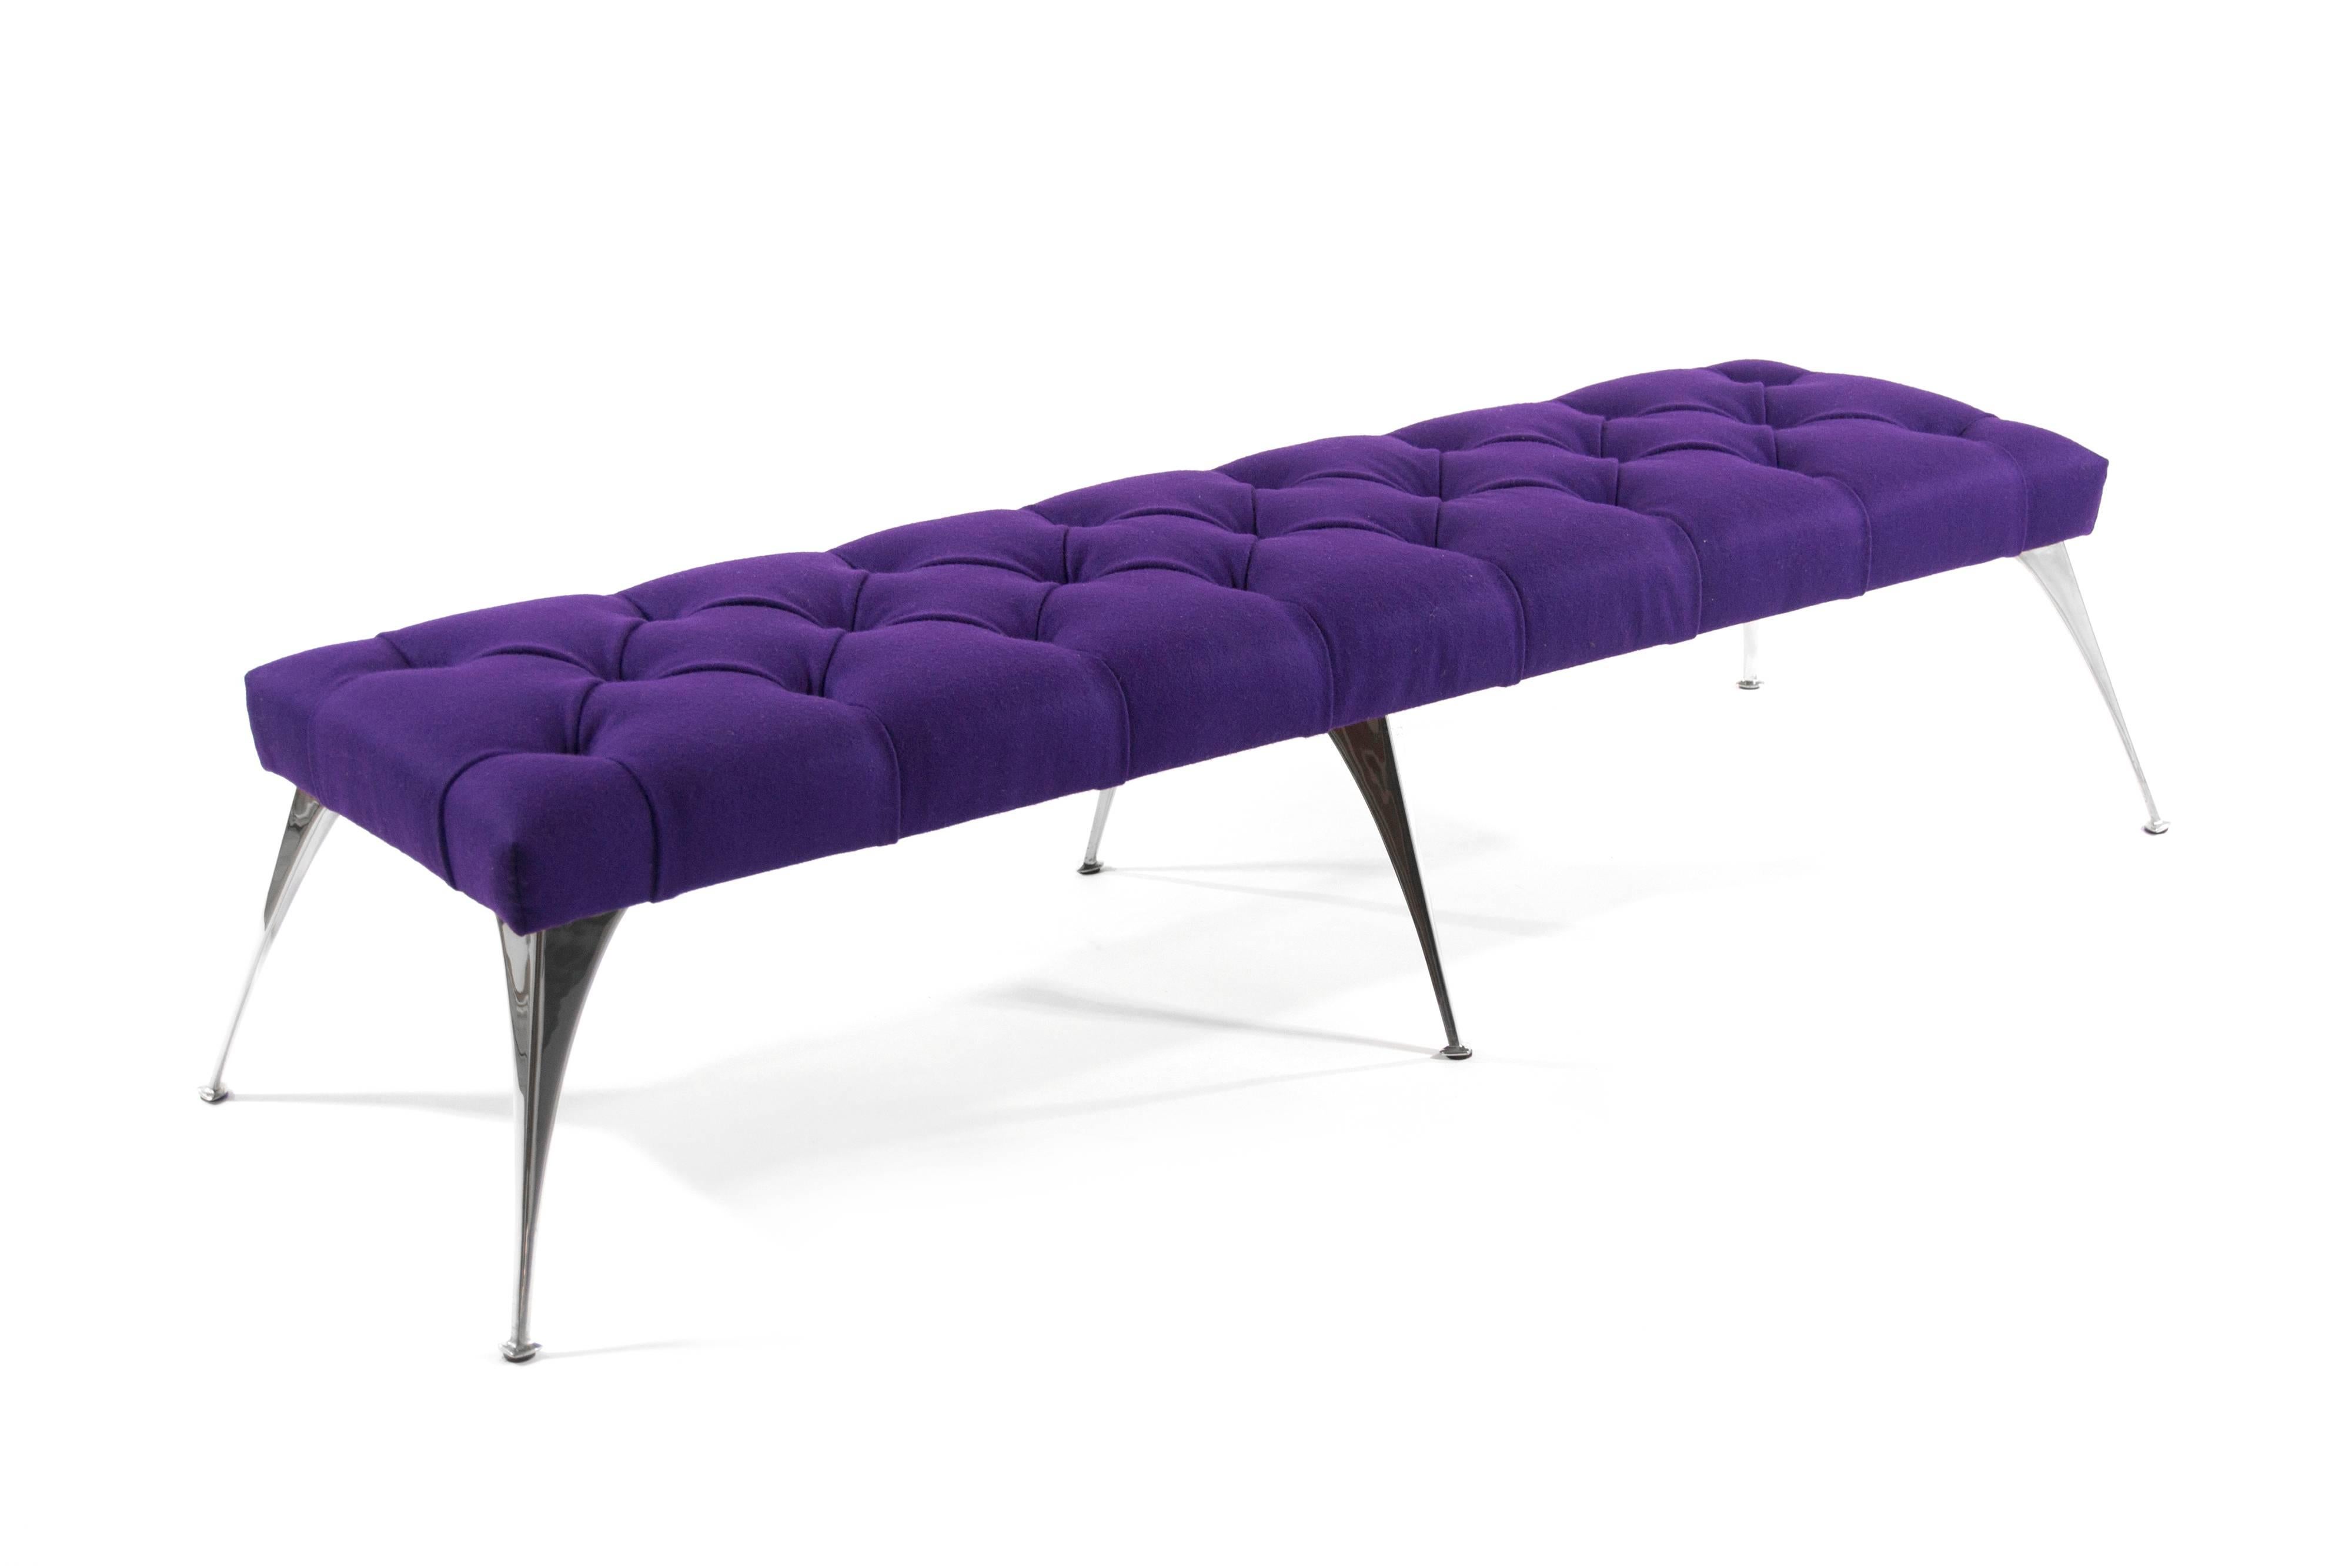 Gorgeous Italian inspired extra Long bench. Sculptural, splayed nickel legs in the style of Gio Ponti. Tufted top upholstered in gorgeous purple wool. Price listed as shown.